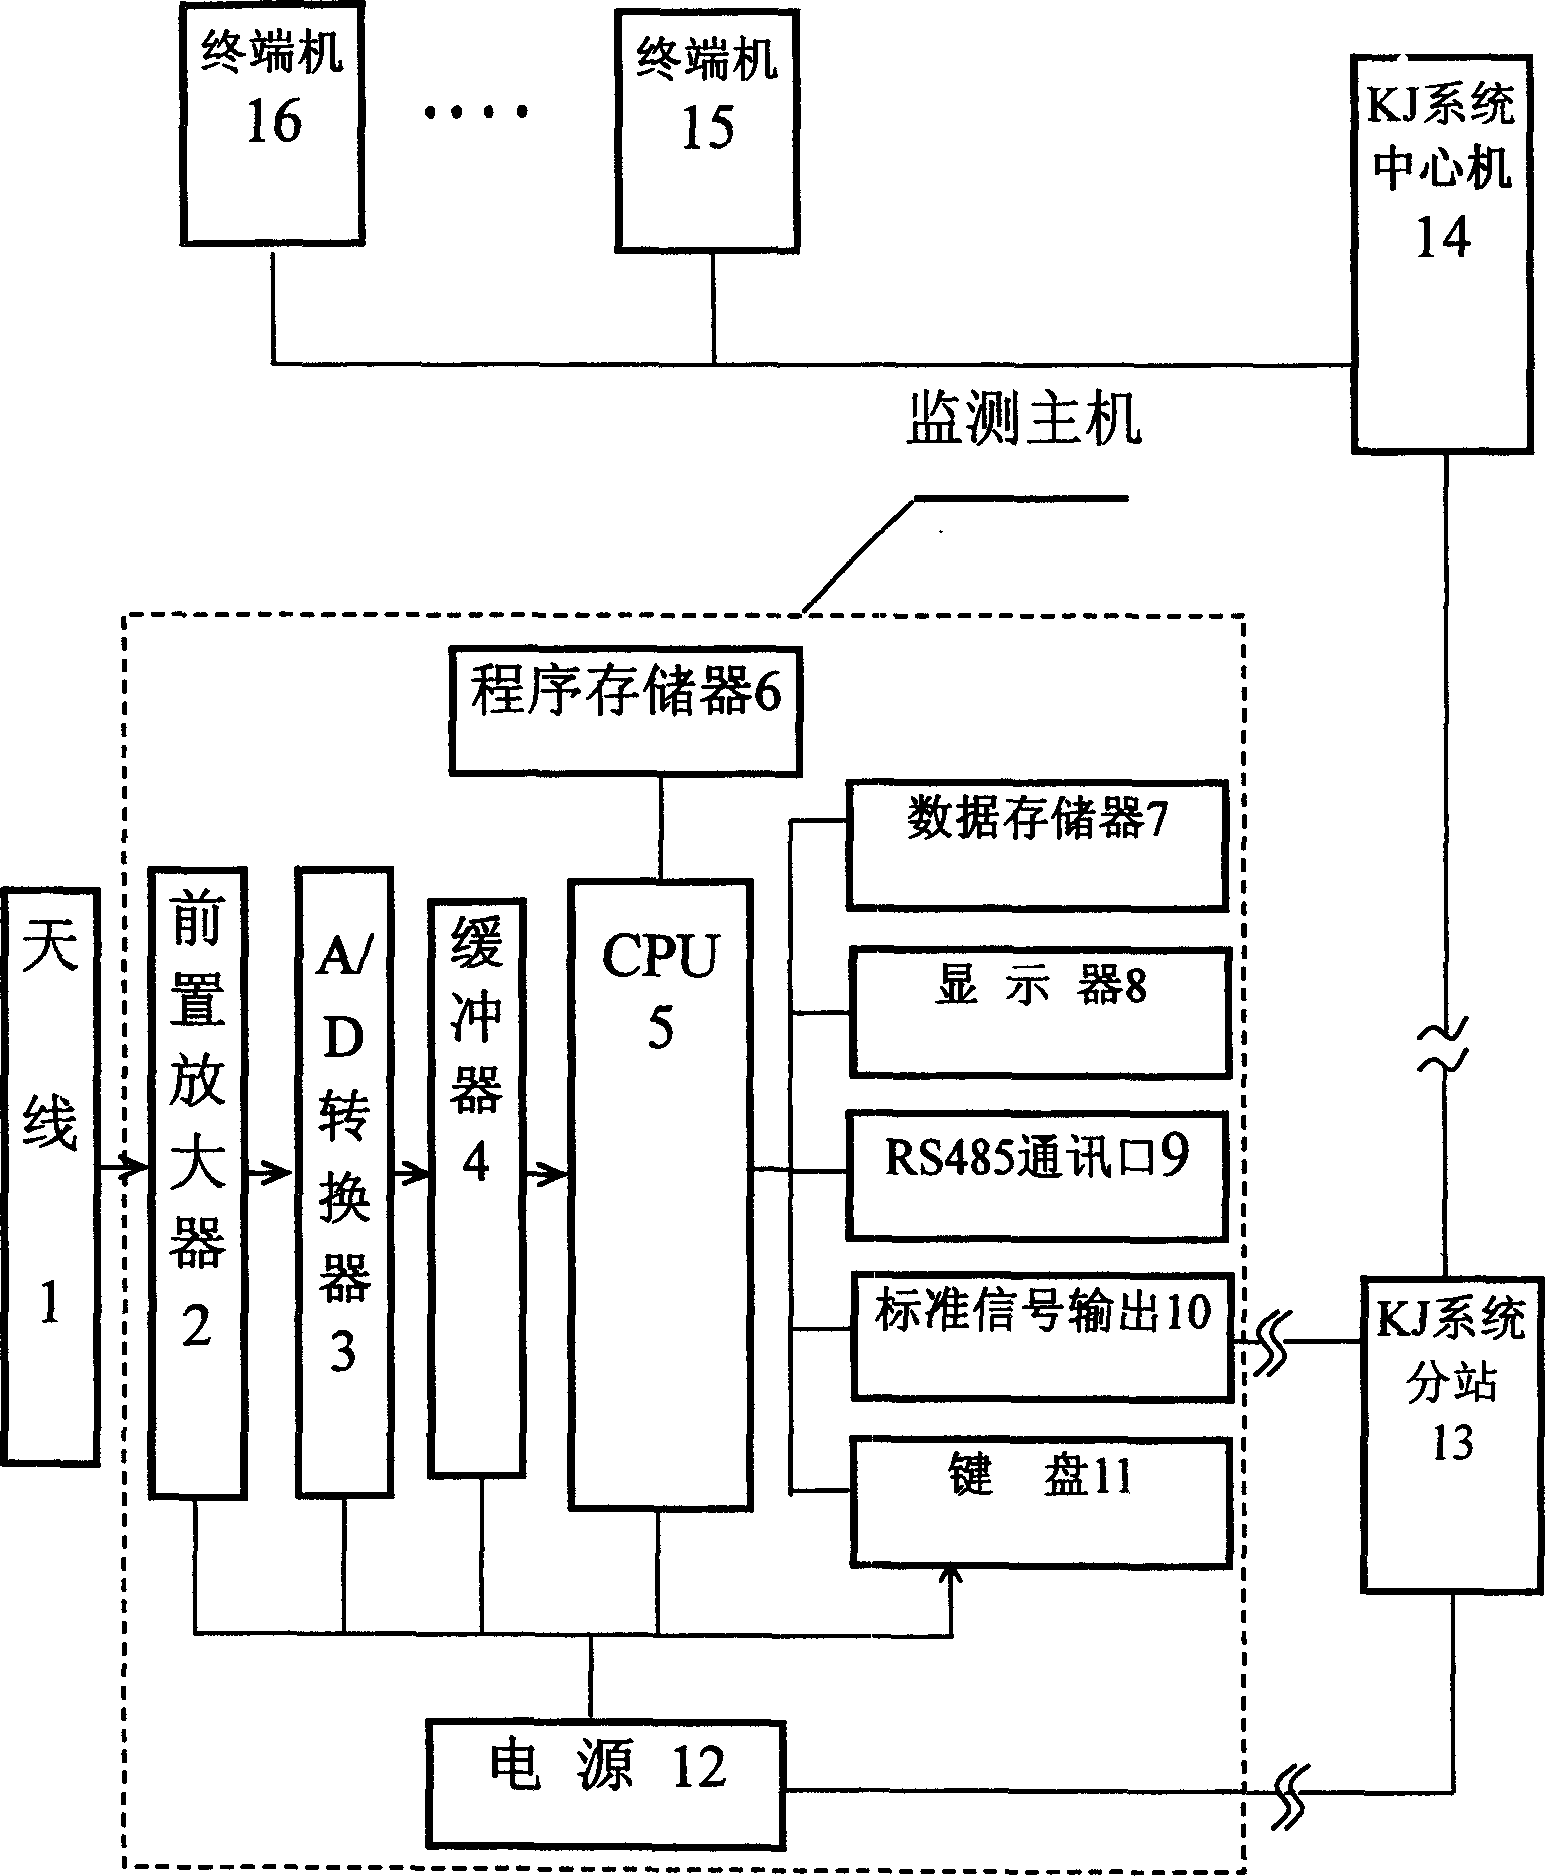 Real time monitoring forecasting device of coal rock dynamic disaster and forecasting method